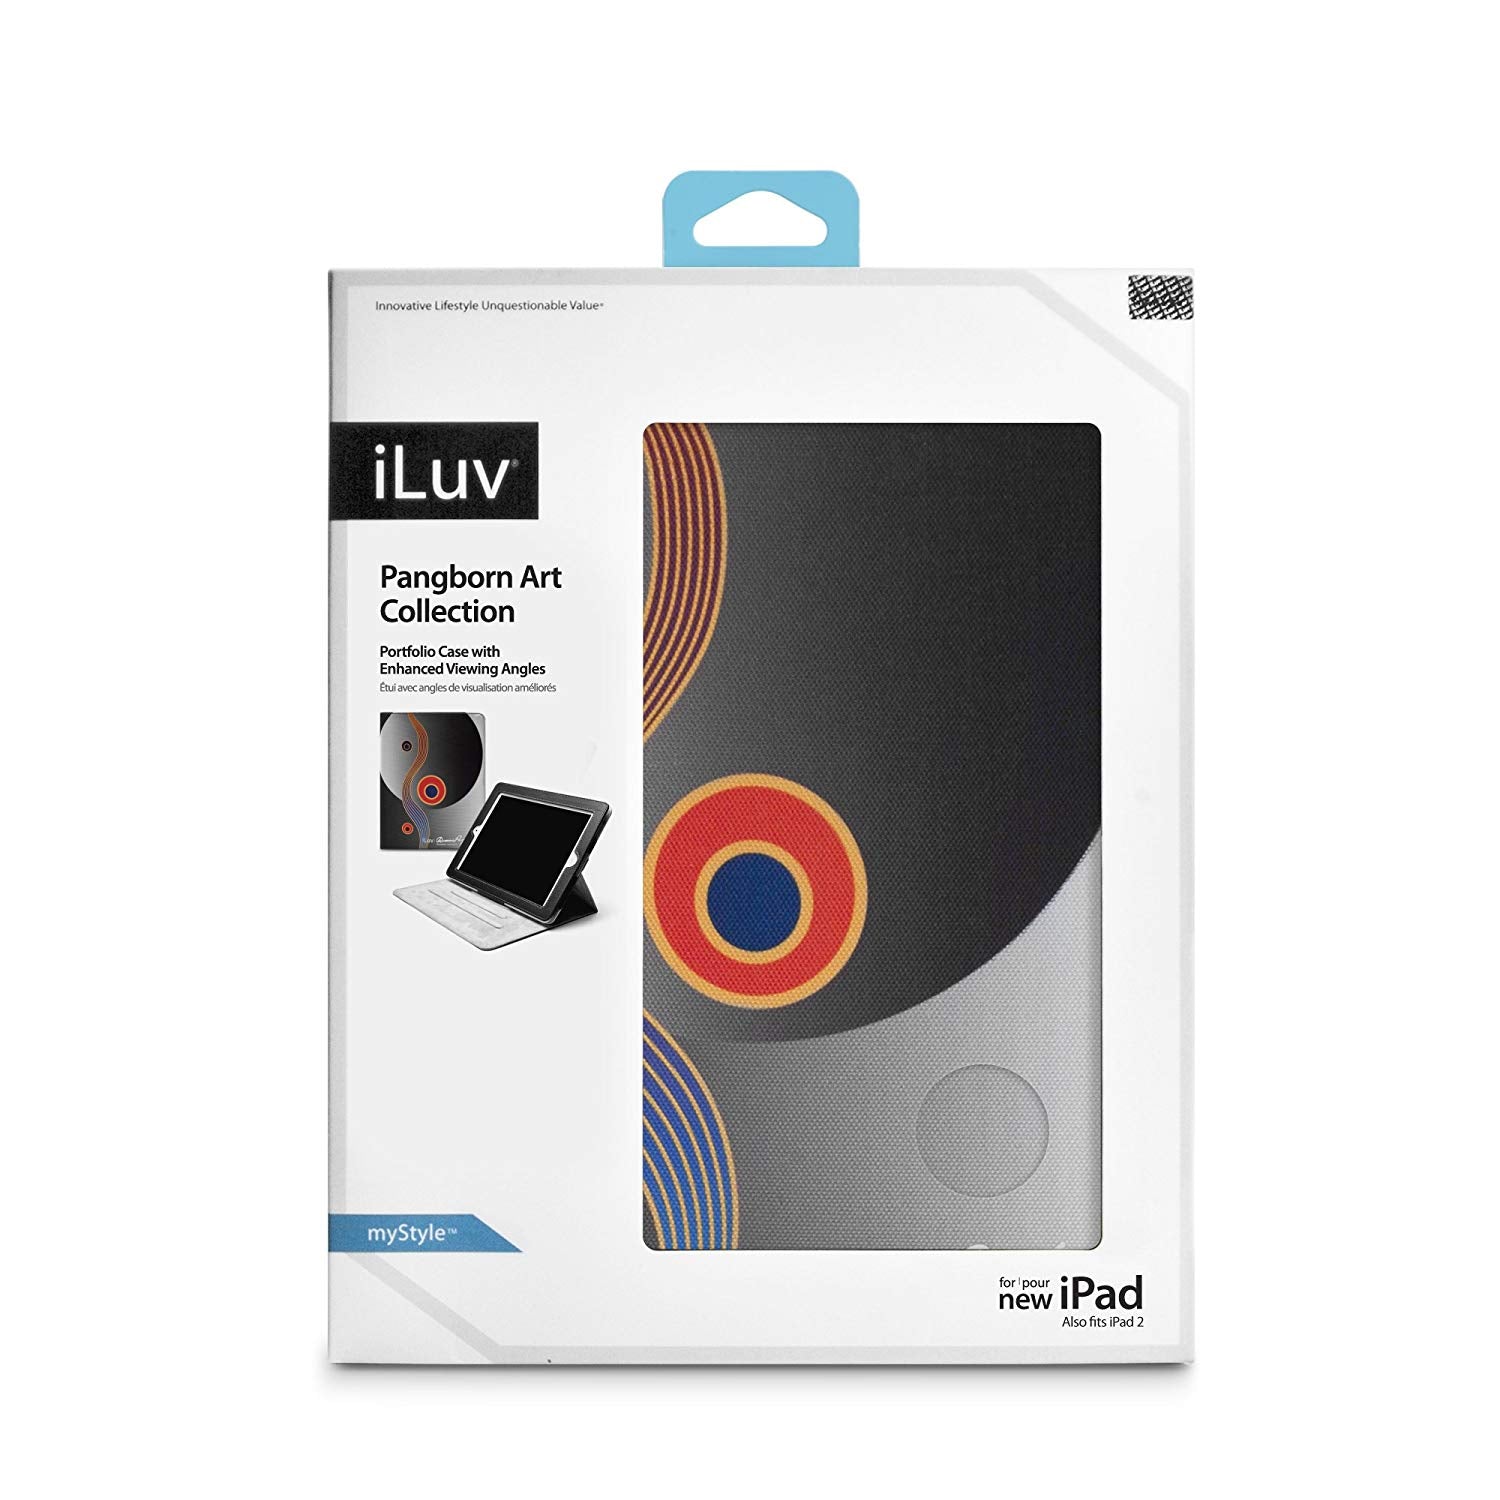 iLuv Pangborn Collection Portfolio Case with Enhanced Viewing Angles for Apple iPad 4, iPad 3rd Generation and iPad 2 (iCC838ABS)